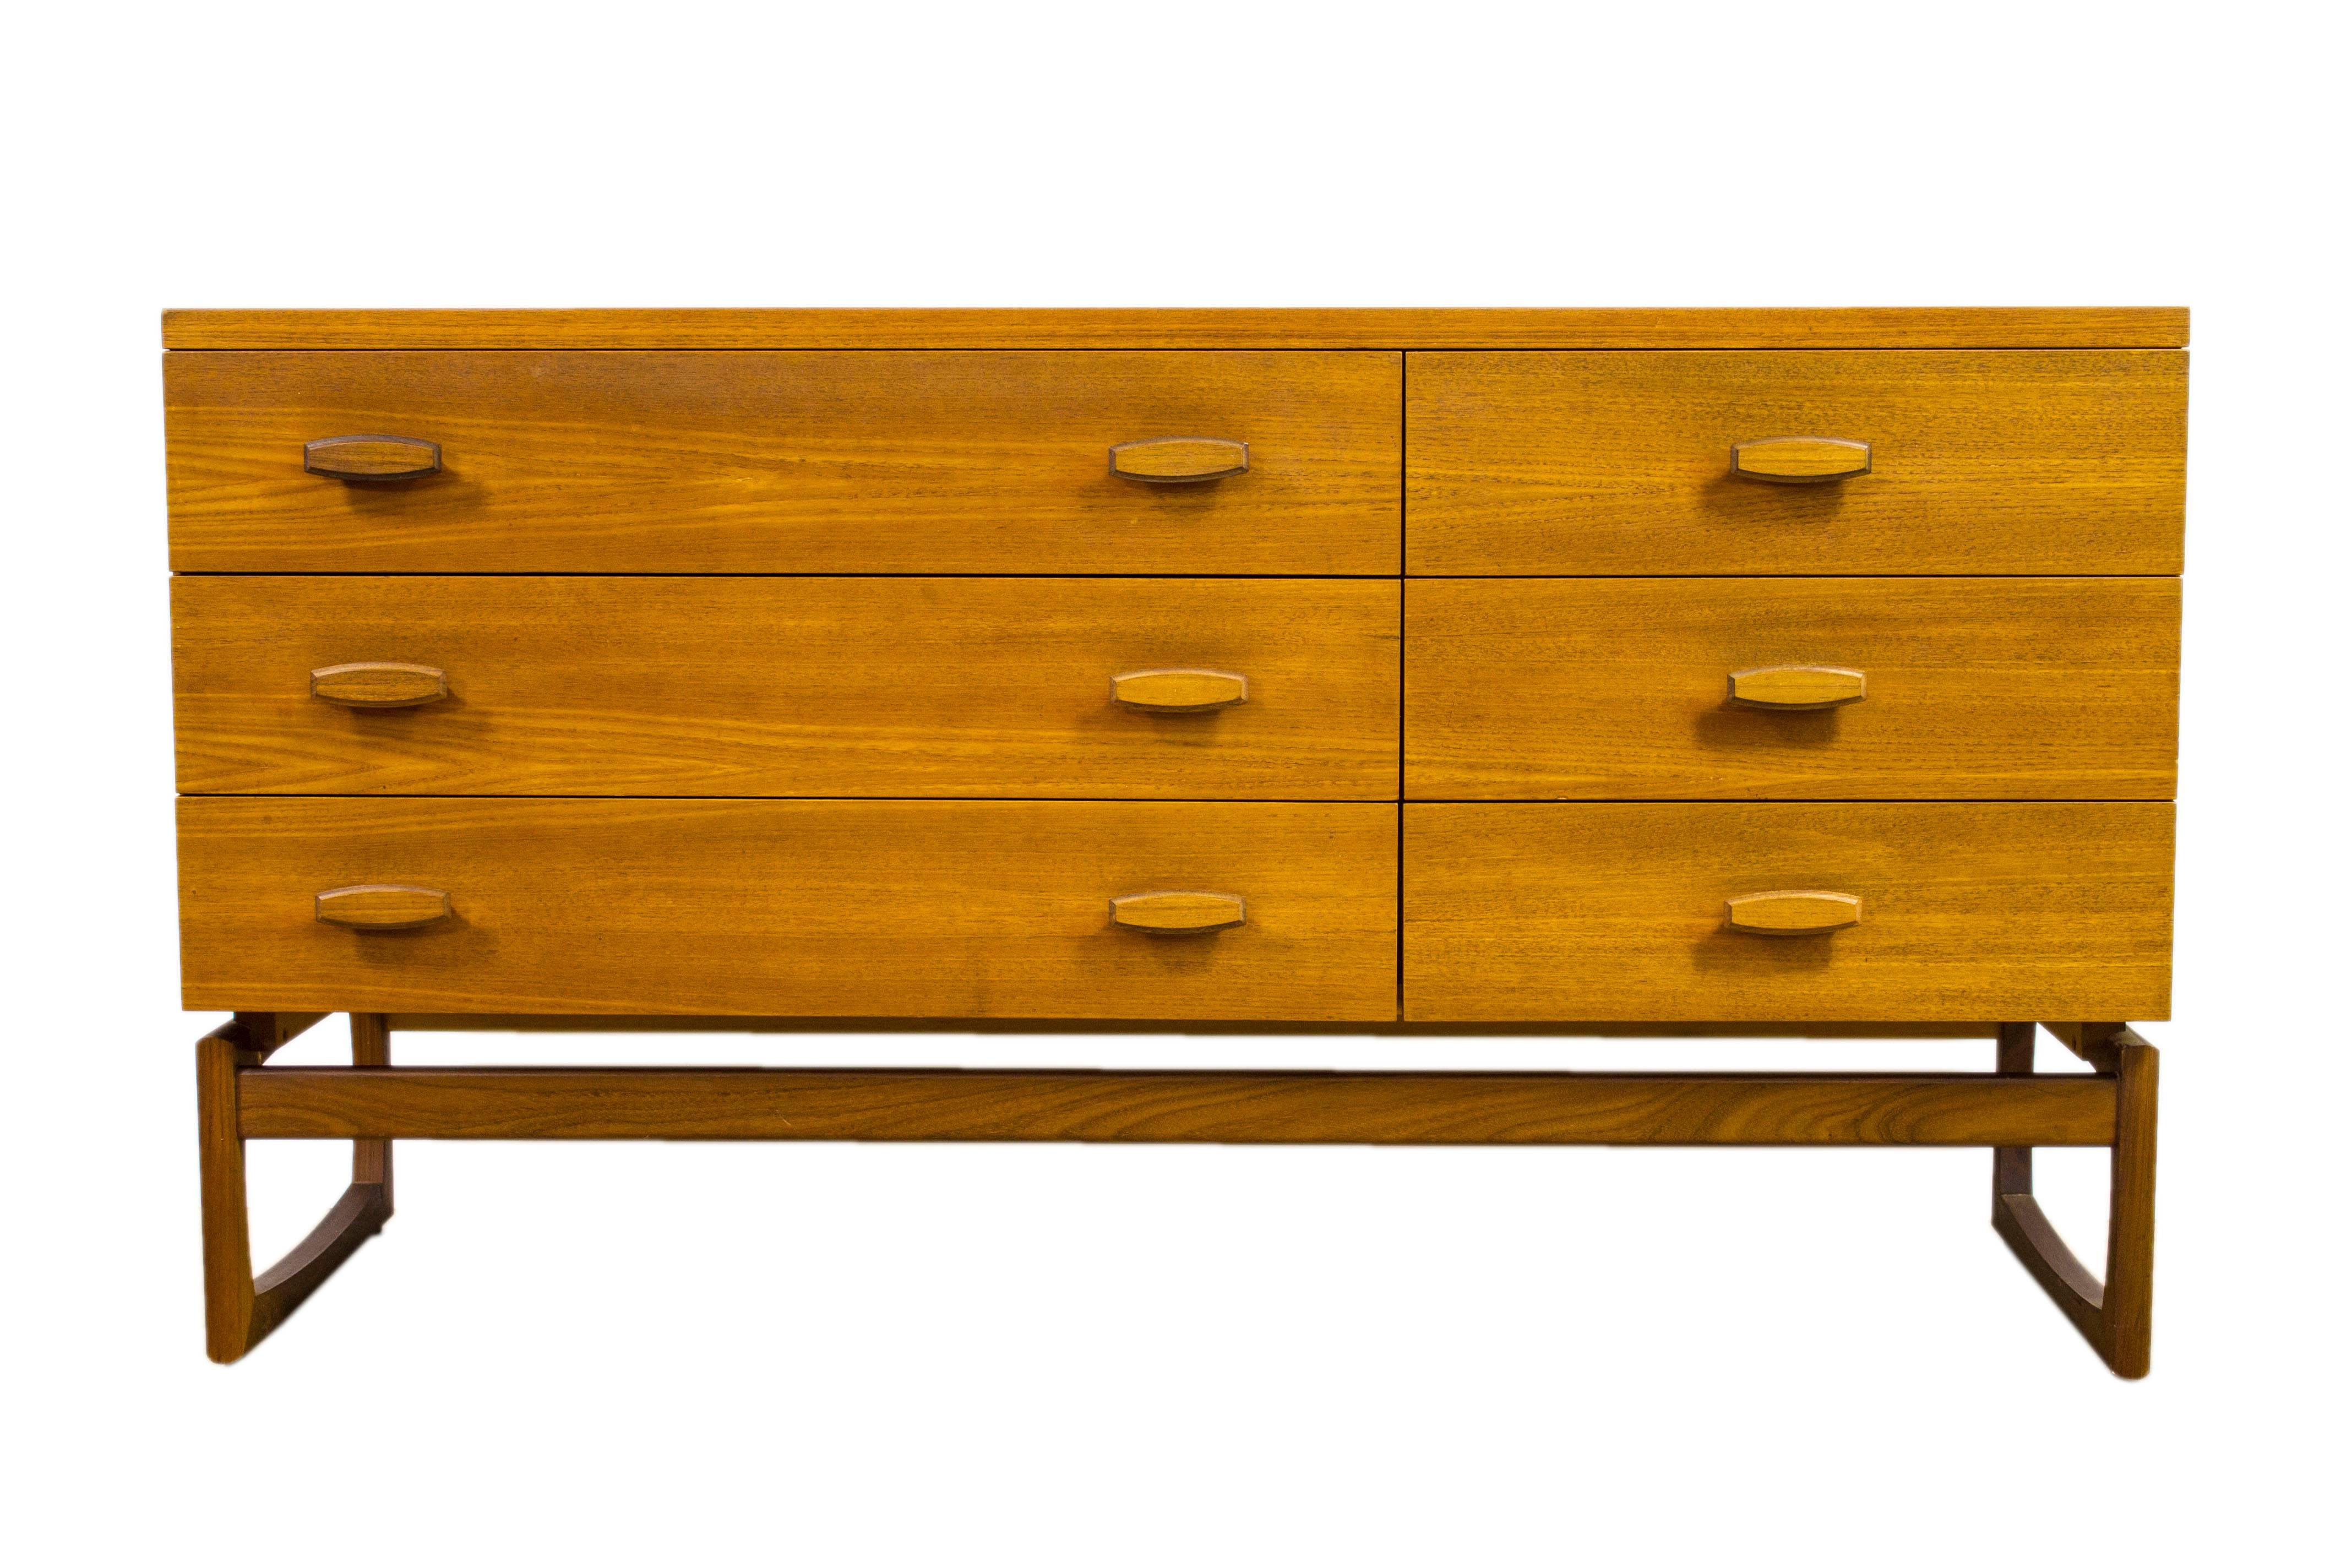 1965 could be argued as one of the best years for G Plan design with R Bennett creating the stunning Quadrille range of furniture in luxurious teak with beautiful geometric styled handles.

An elegant and striking design, this rare sideboard